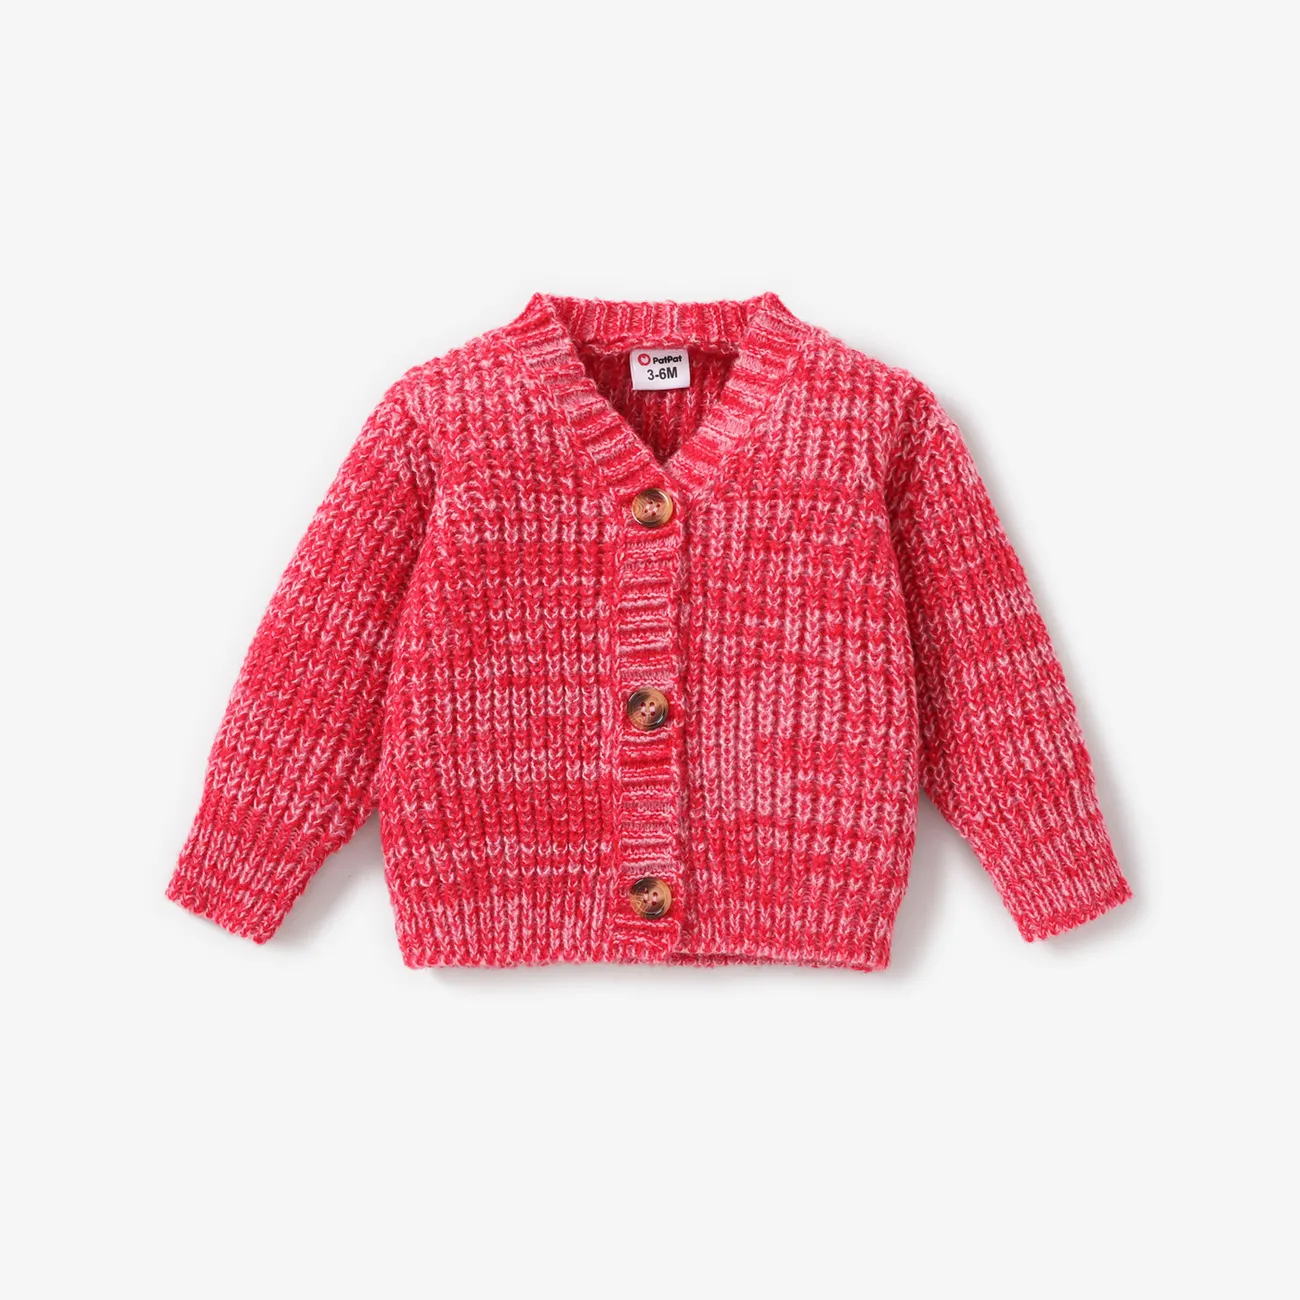 Baby Knit Cardigans Button Sweater Coat Red/White big image 1